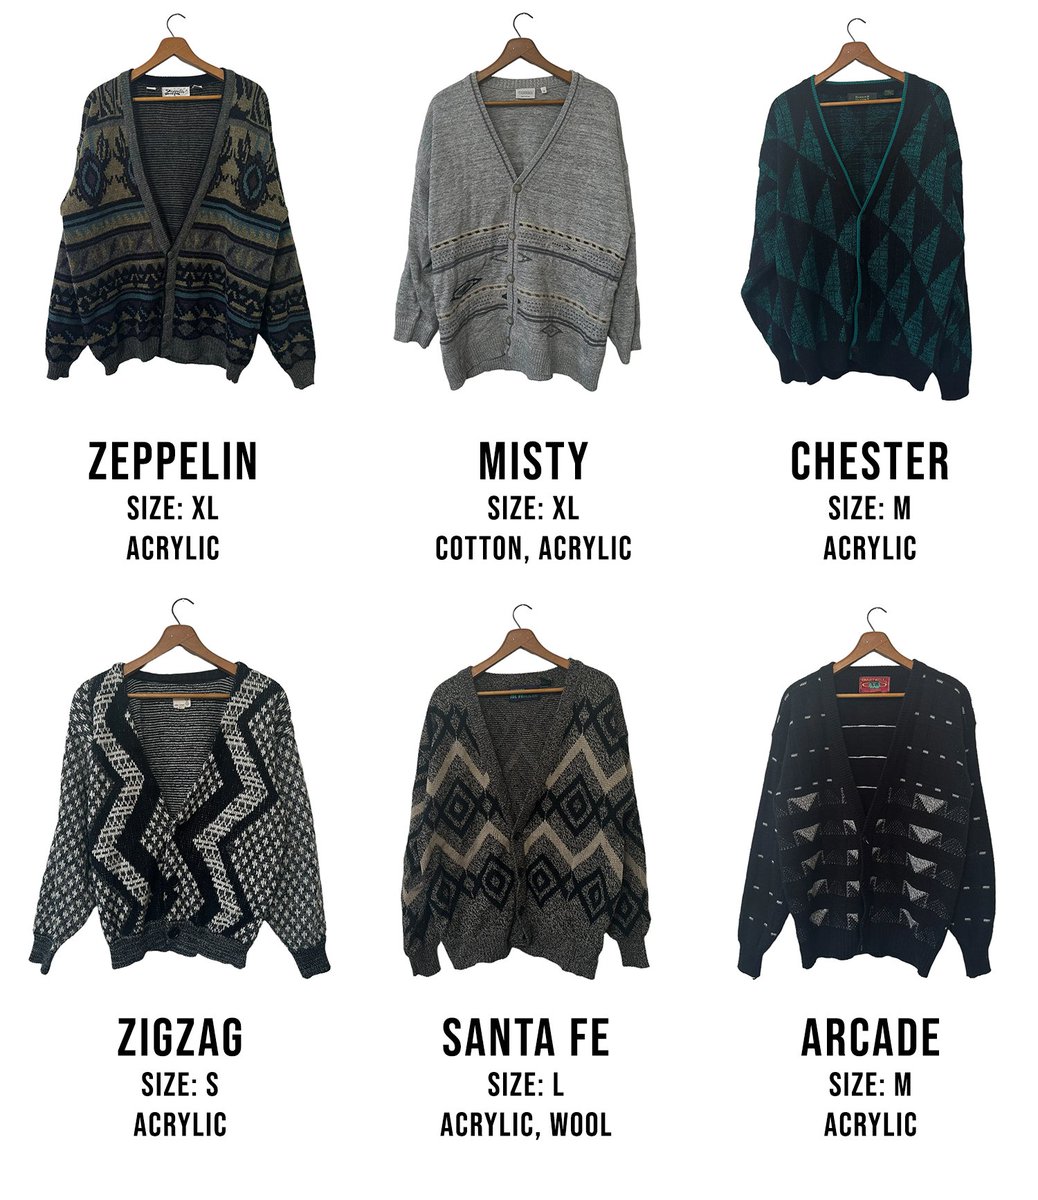 Our cozy vintage cardigans are back in stock! Choose your favorite from our large selection of unique inventory!  #vintageclothing #cardigan #90sfashion